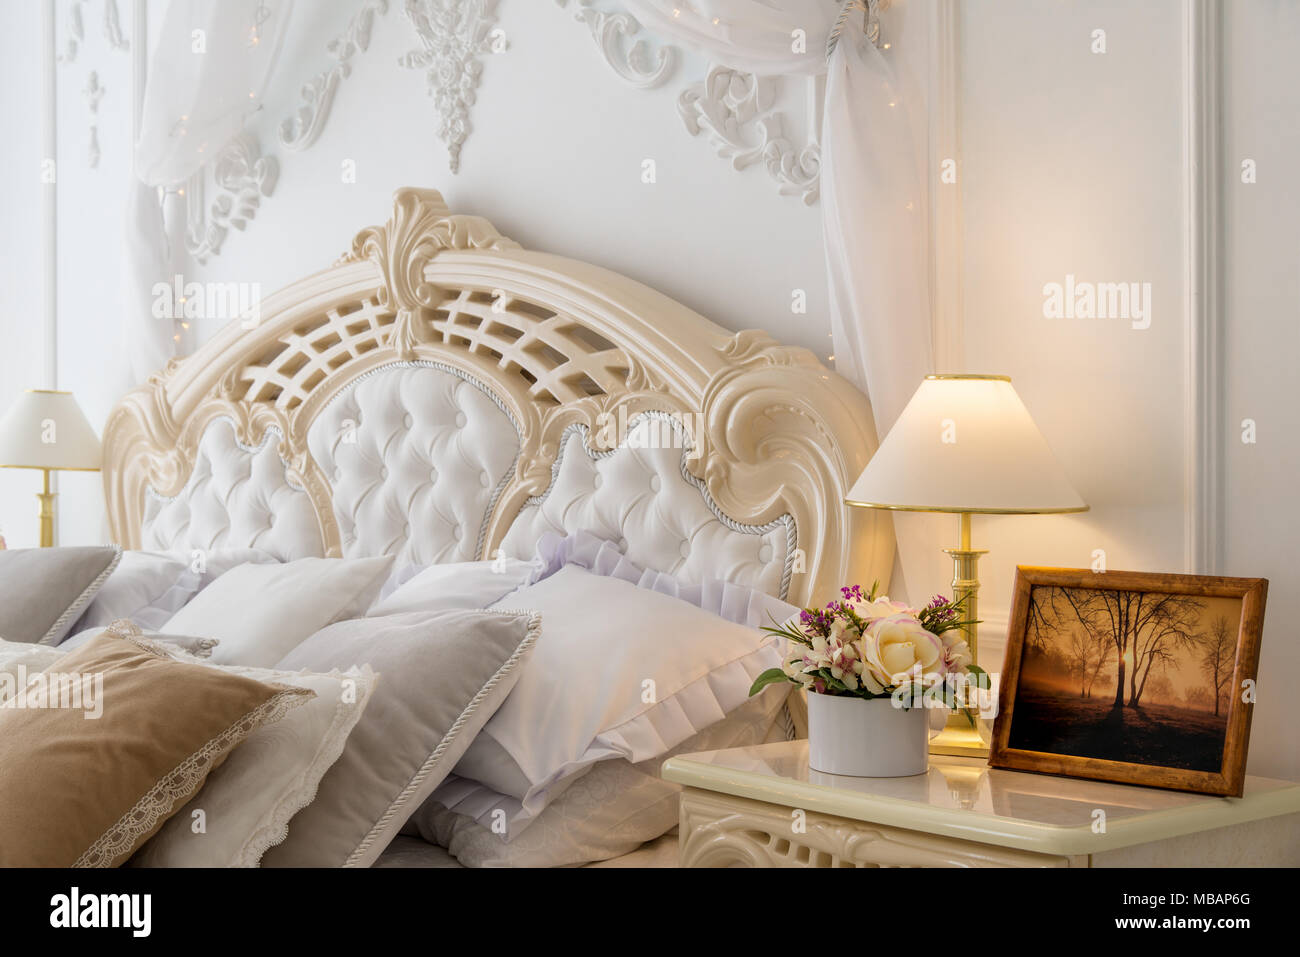 Comfortable classic bedroom with lamp and picture on bedside table Stock Photo